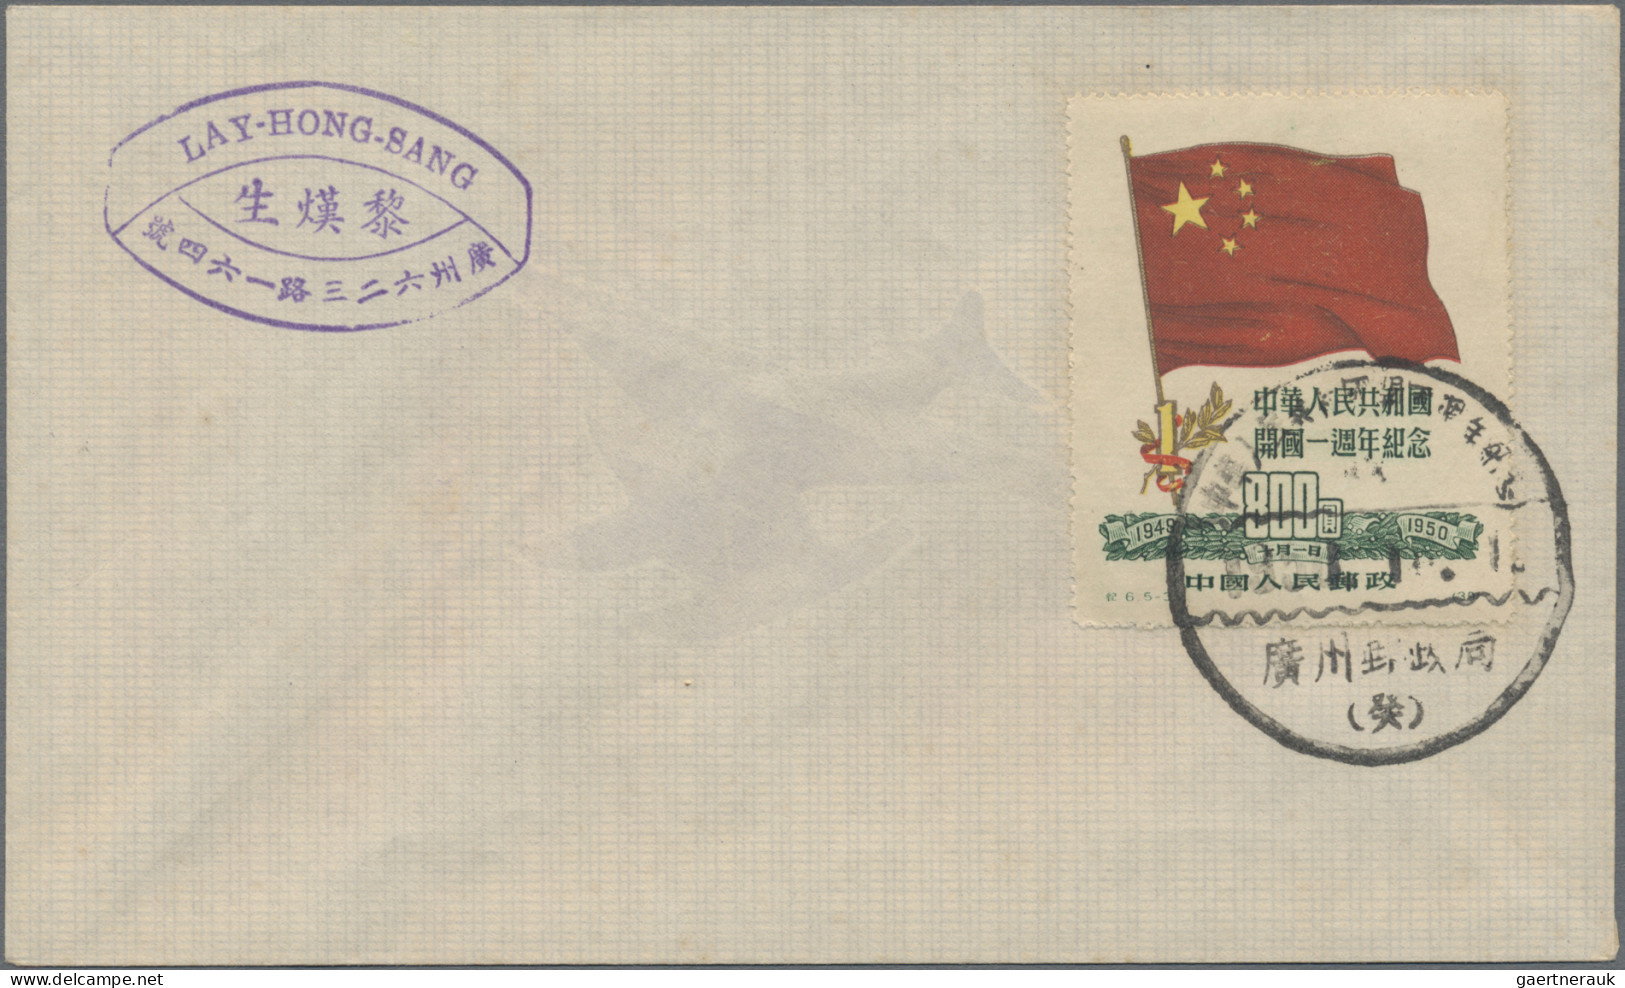 China (PRC): 1950/52, four first day covers including C6 $800 unaddressed, C11 L